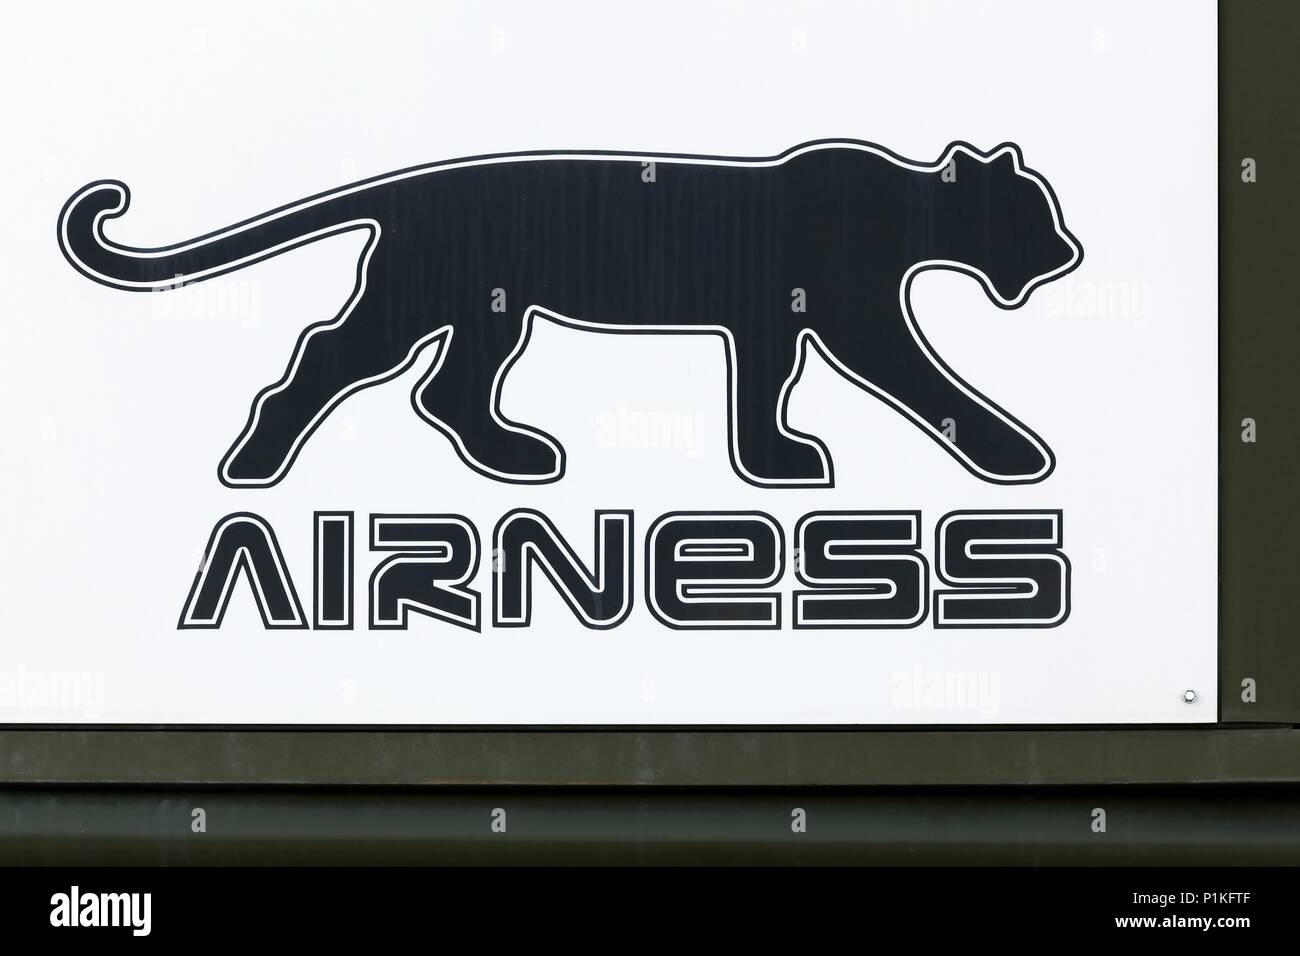 Creches, France - June 5, 2018: Airness logo on a wall. Airness is a  footwear trademark founded in 1999 in Saint-Denis, France Stock Photo -  Alamy